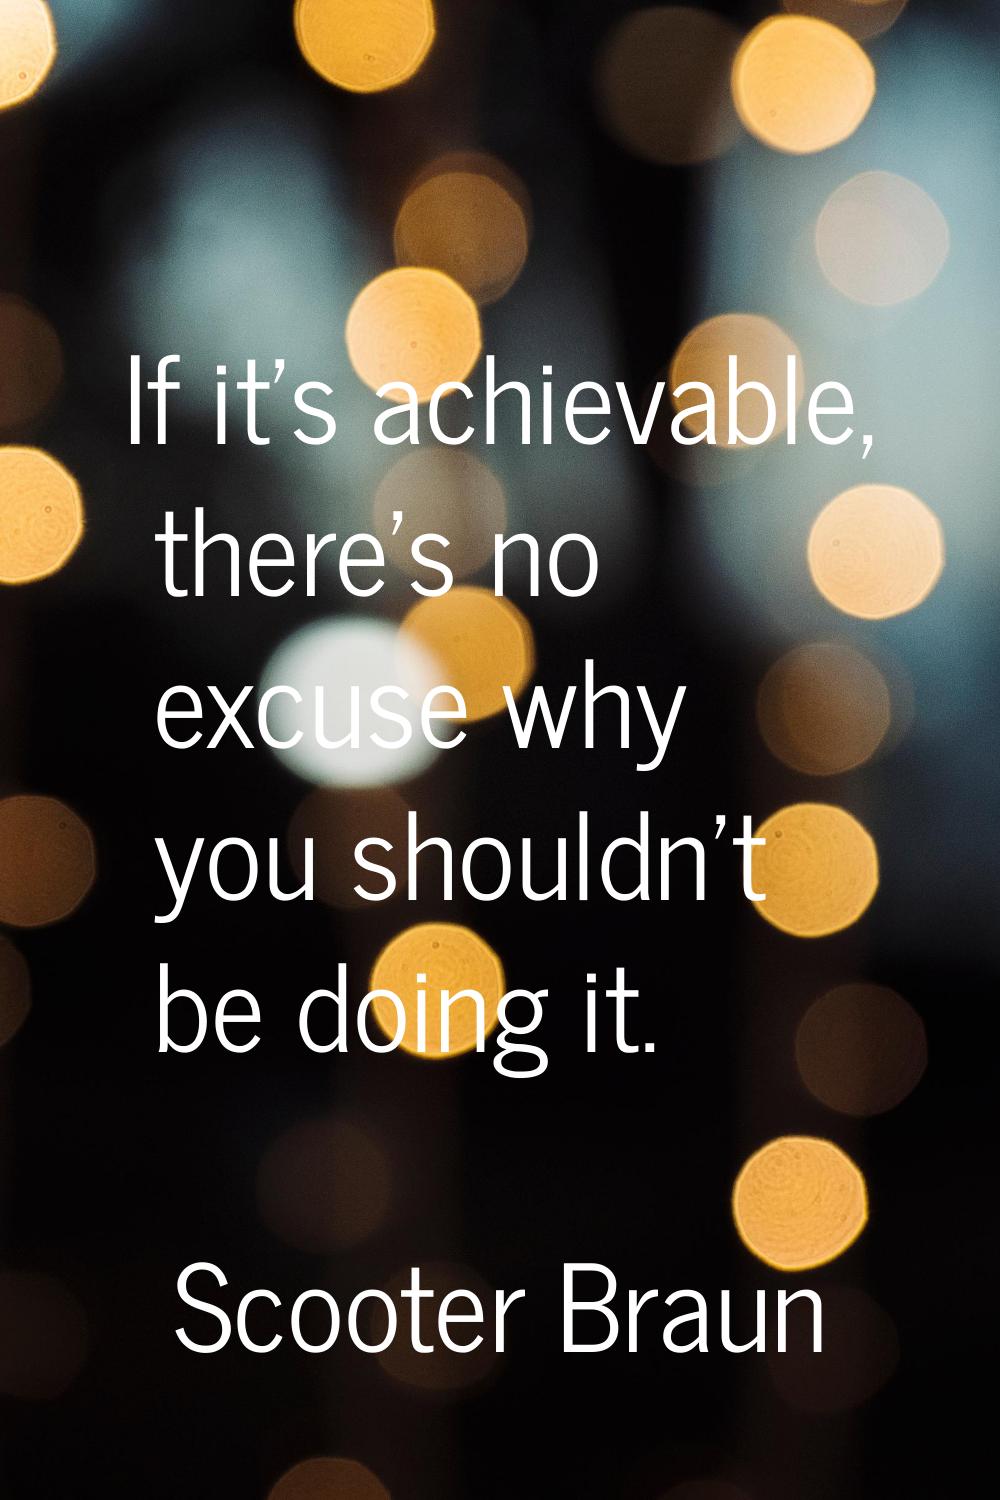 If it's achievable, there's no excuse why you shouldn't be doing it.